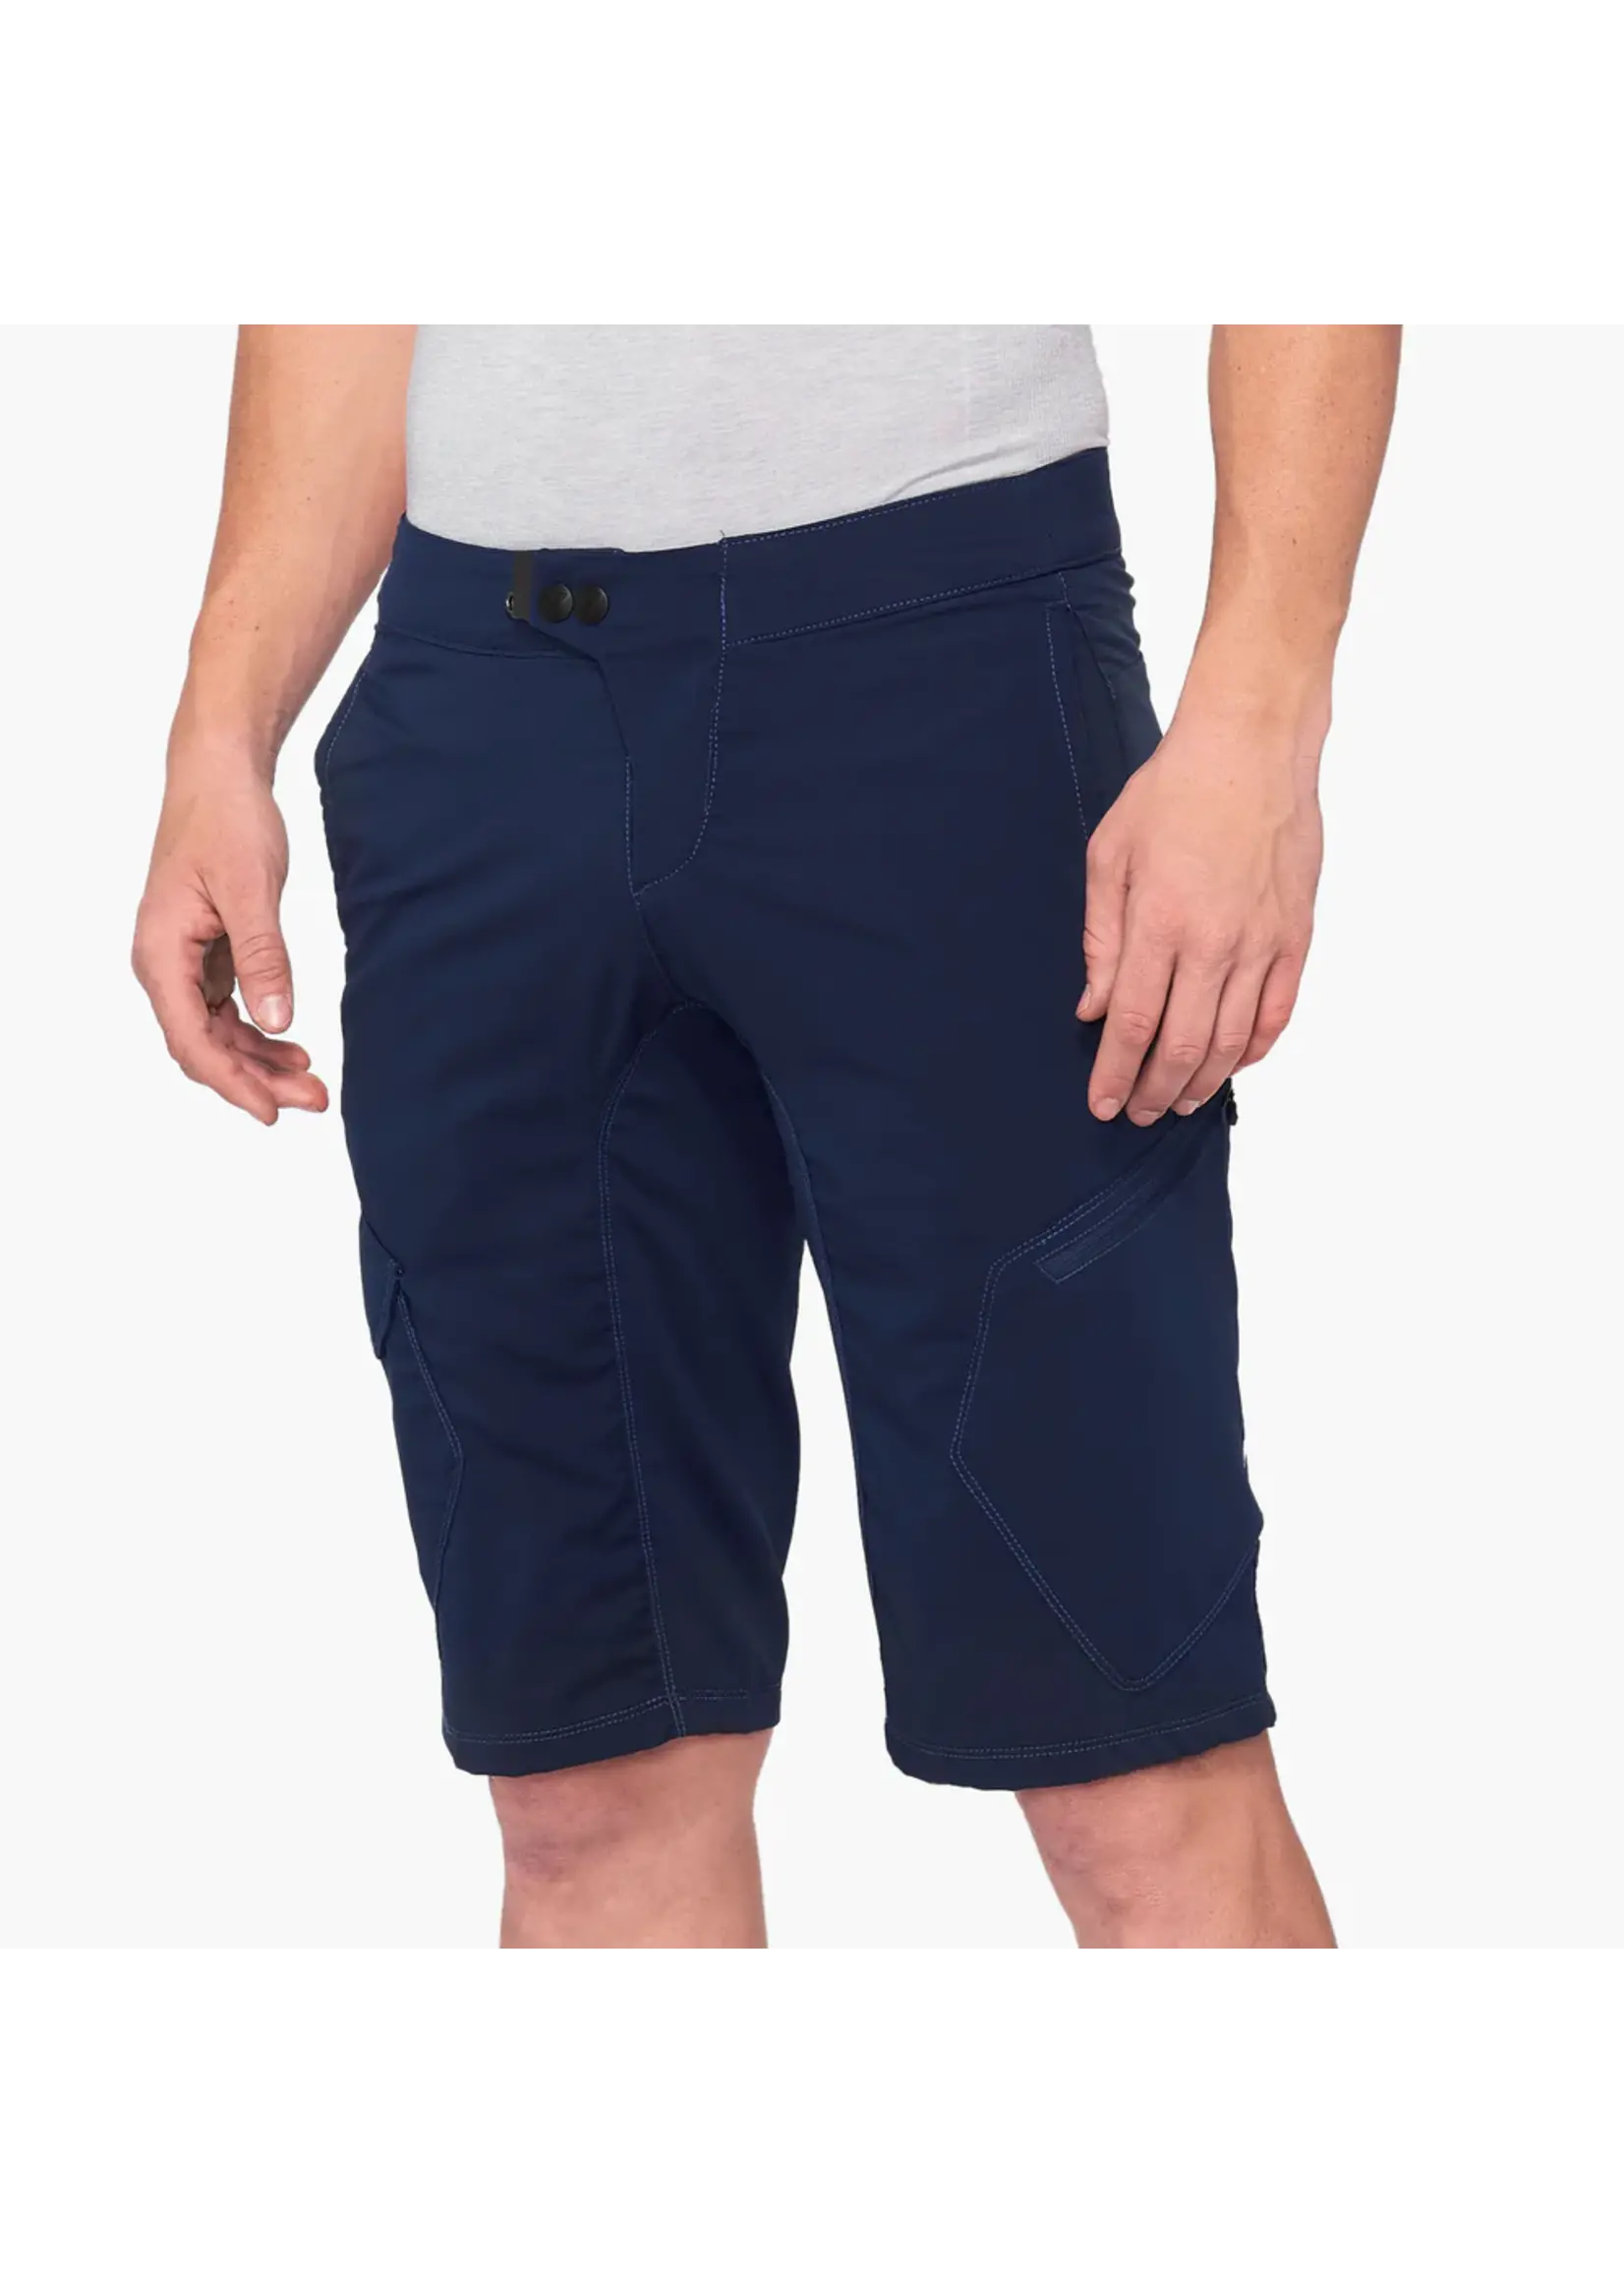 100 Percent 100% RIDECAMP ALL MOUNTAIN SHORTS NAVY